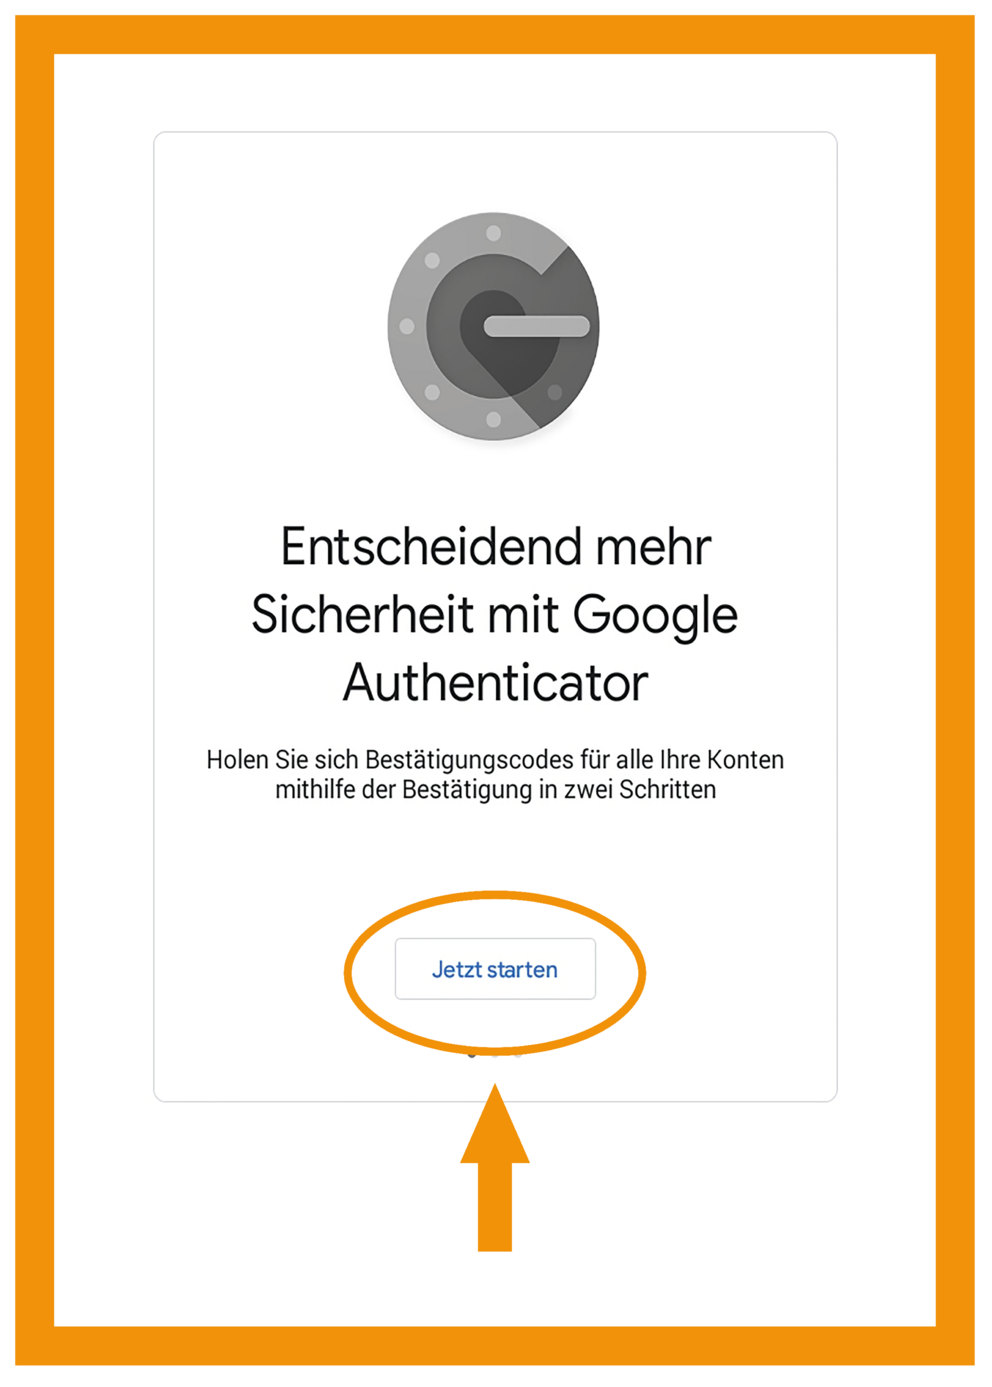 Android Google Authenticator App step 2